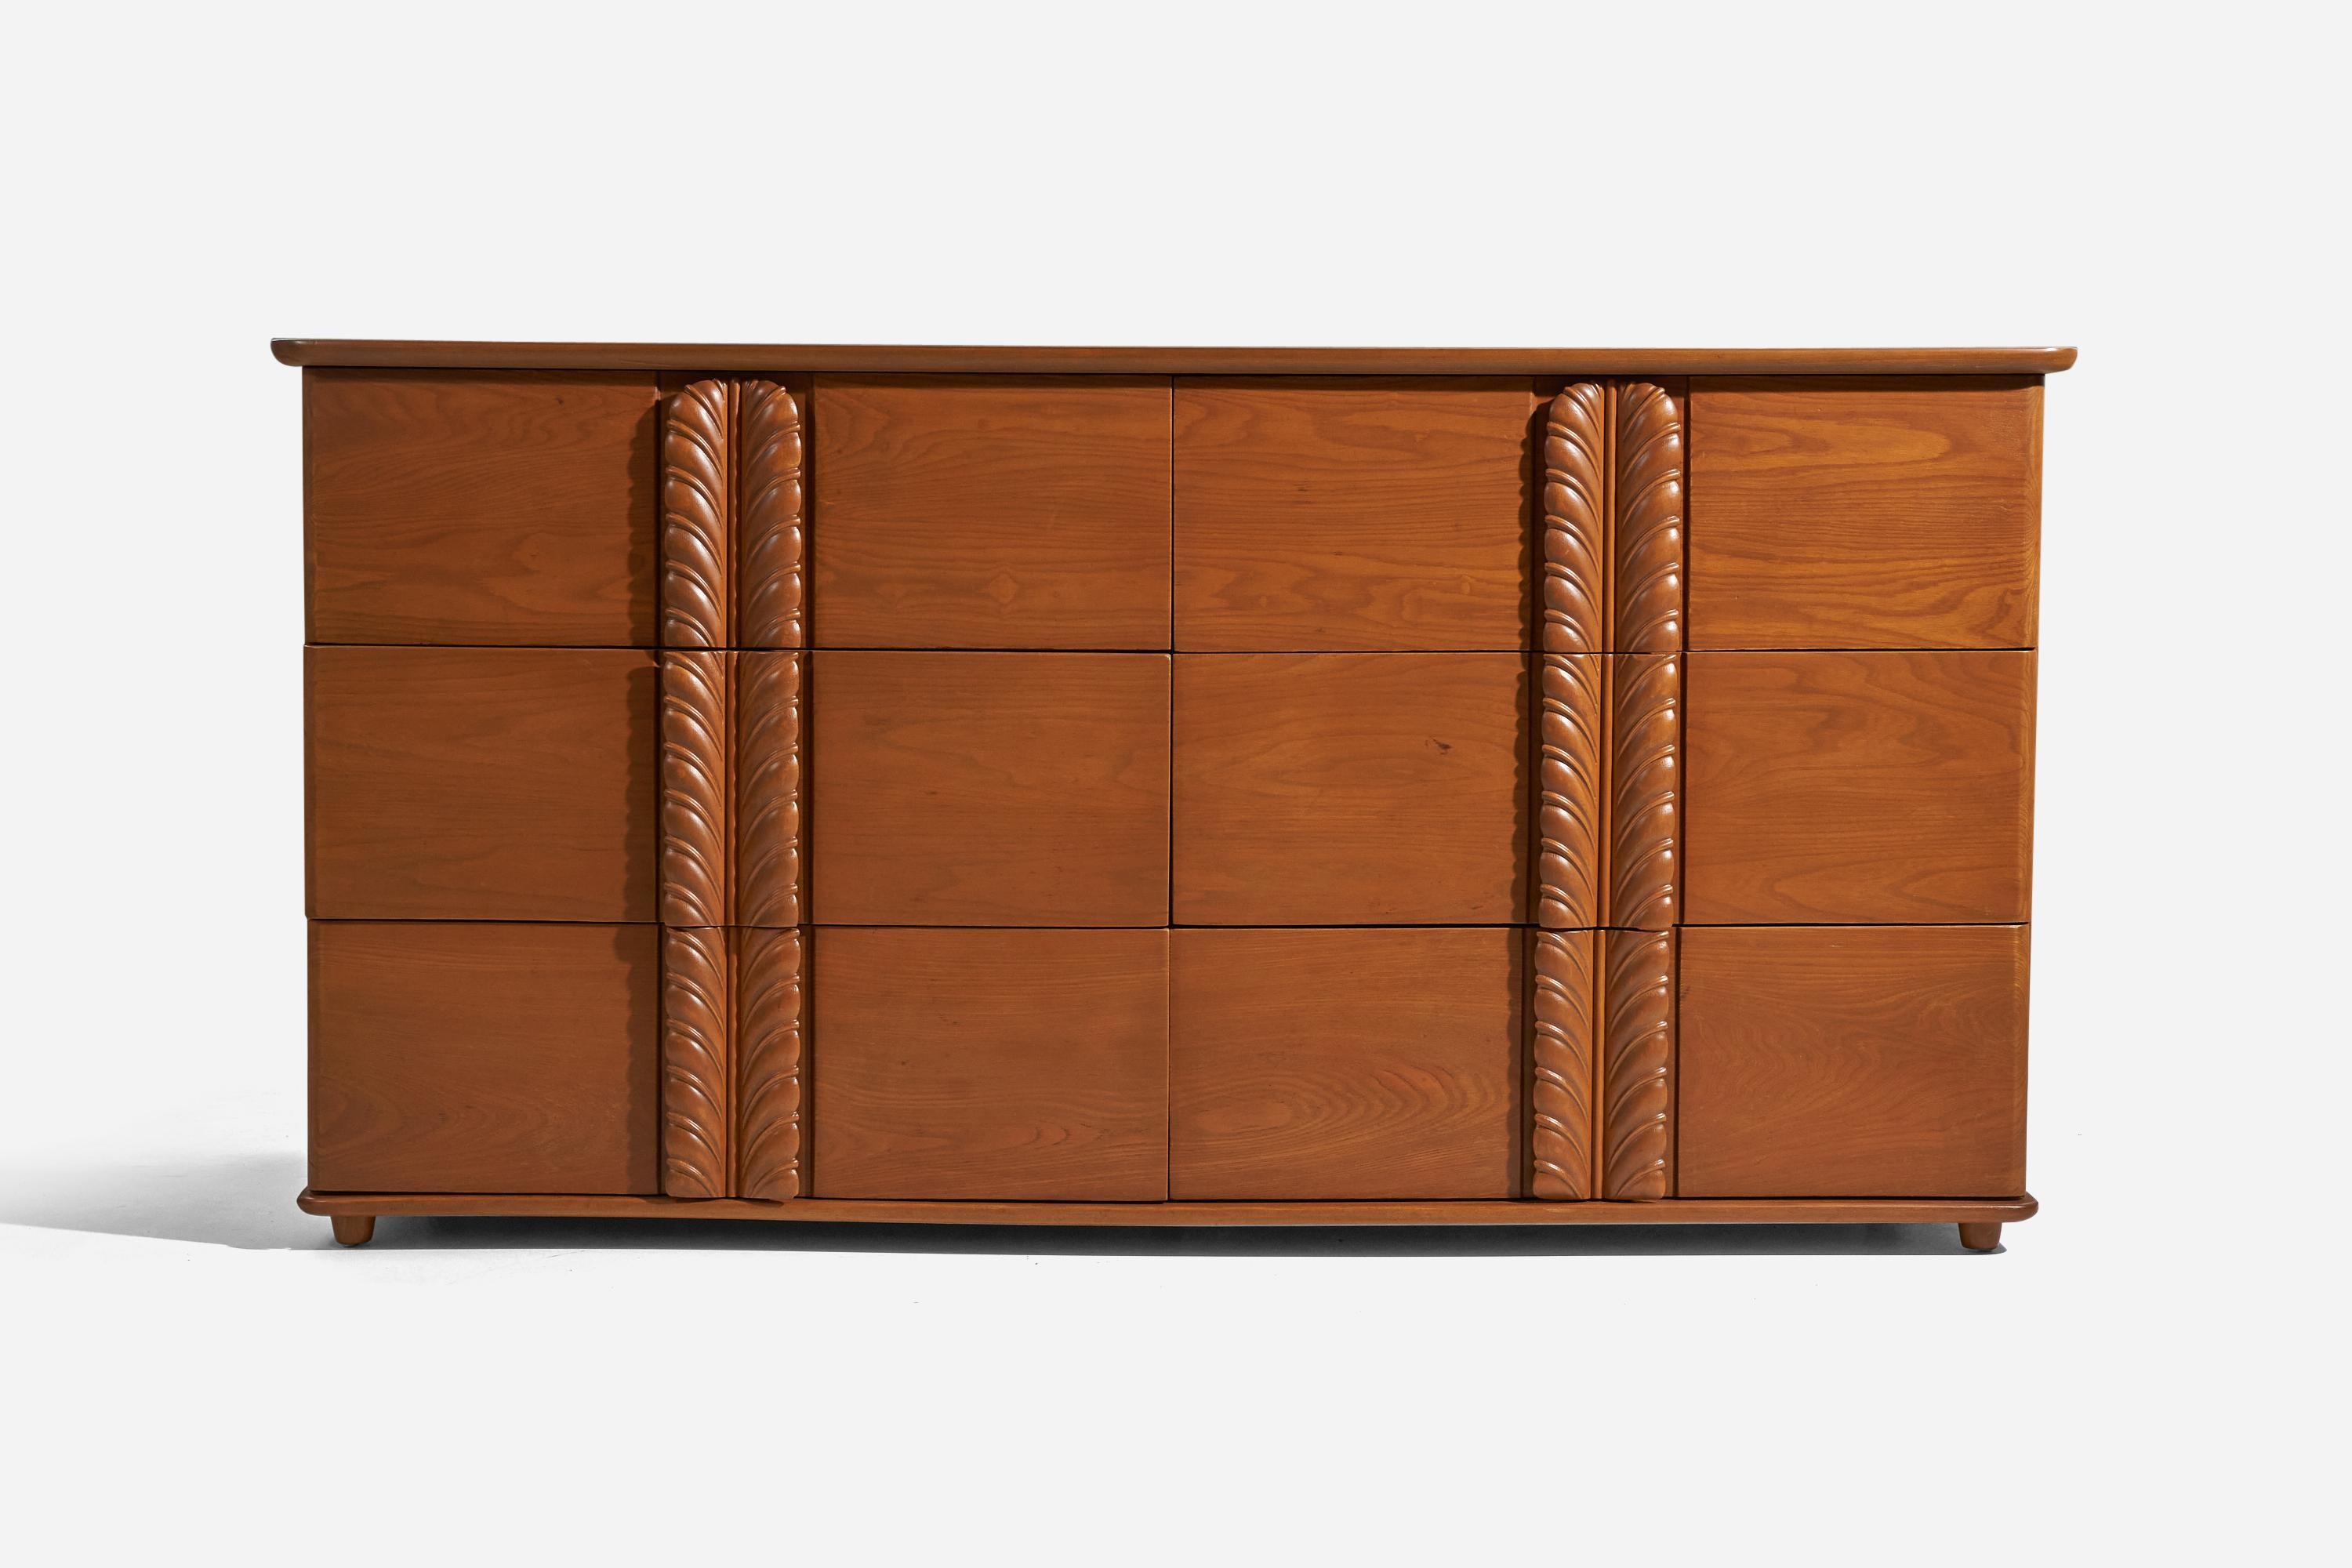 A walnut dresser designed by T.H. Robsjohn-Gibbings and produced by Widdicomb Furniture Company, America, 1950s.
 